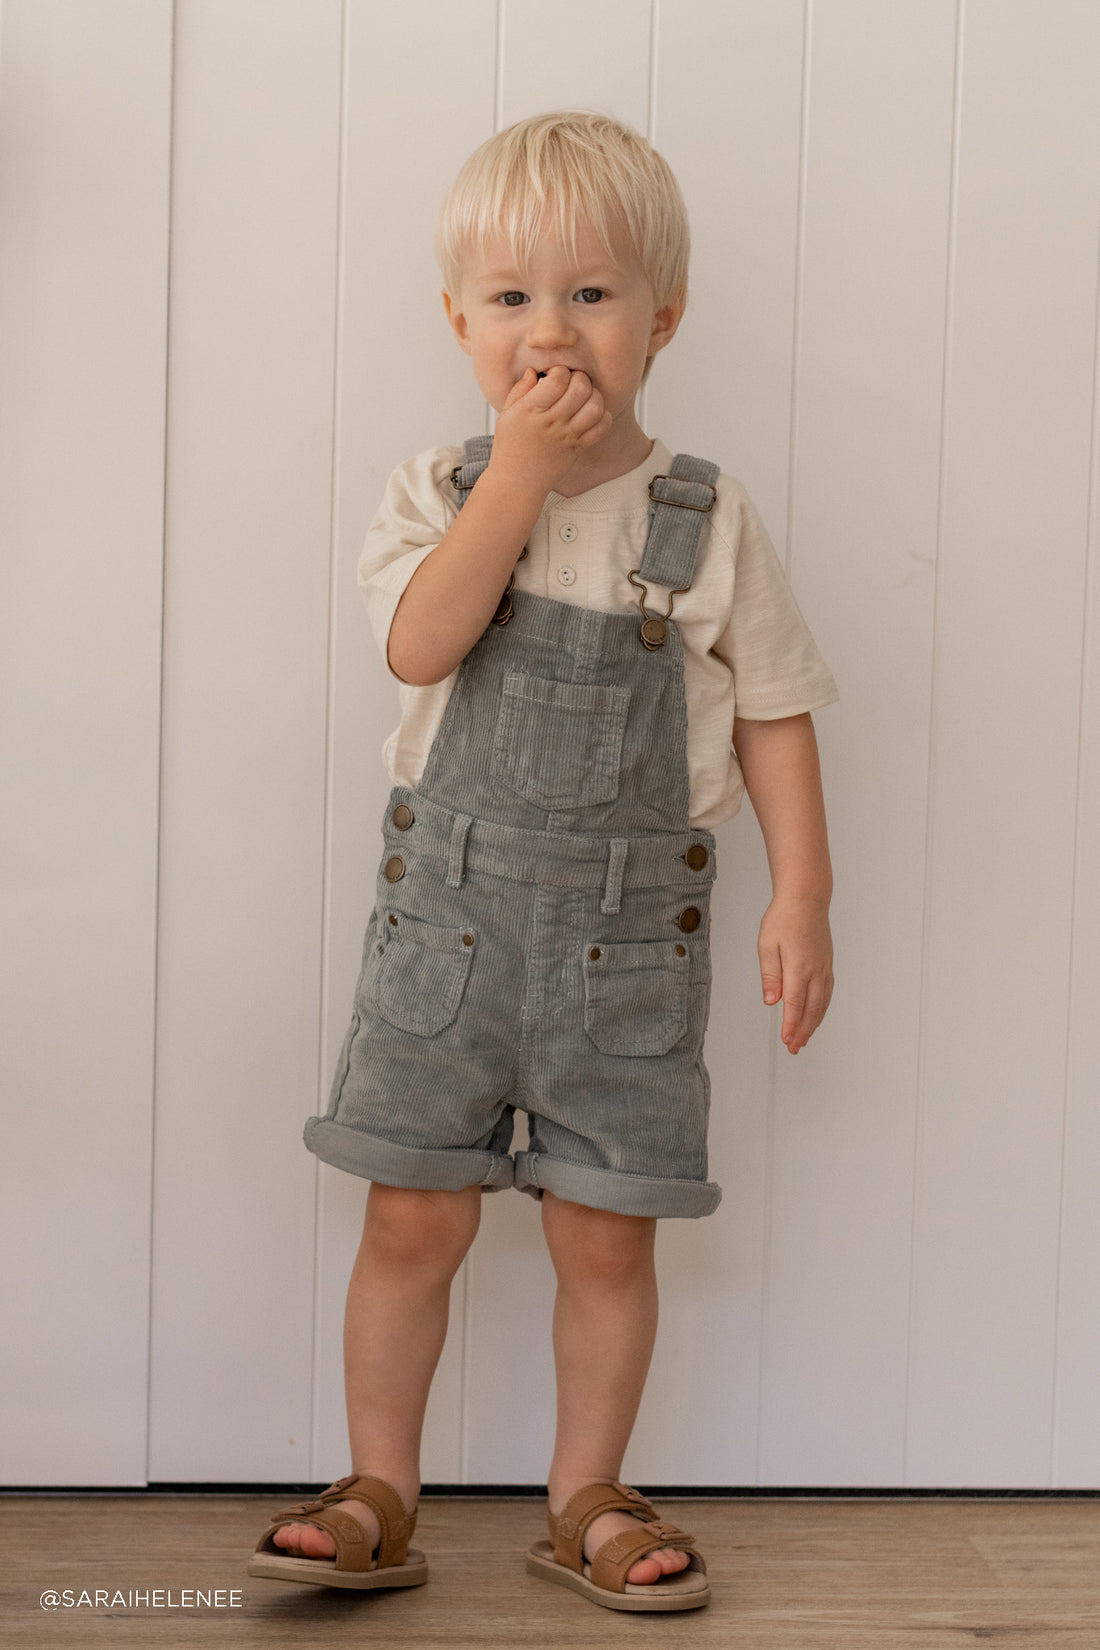 Chase Short Cord Overall - Dusted Olive Childrens Overall from Jamie Kay USA